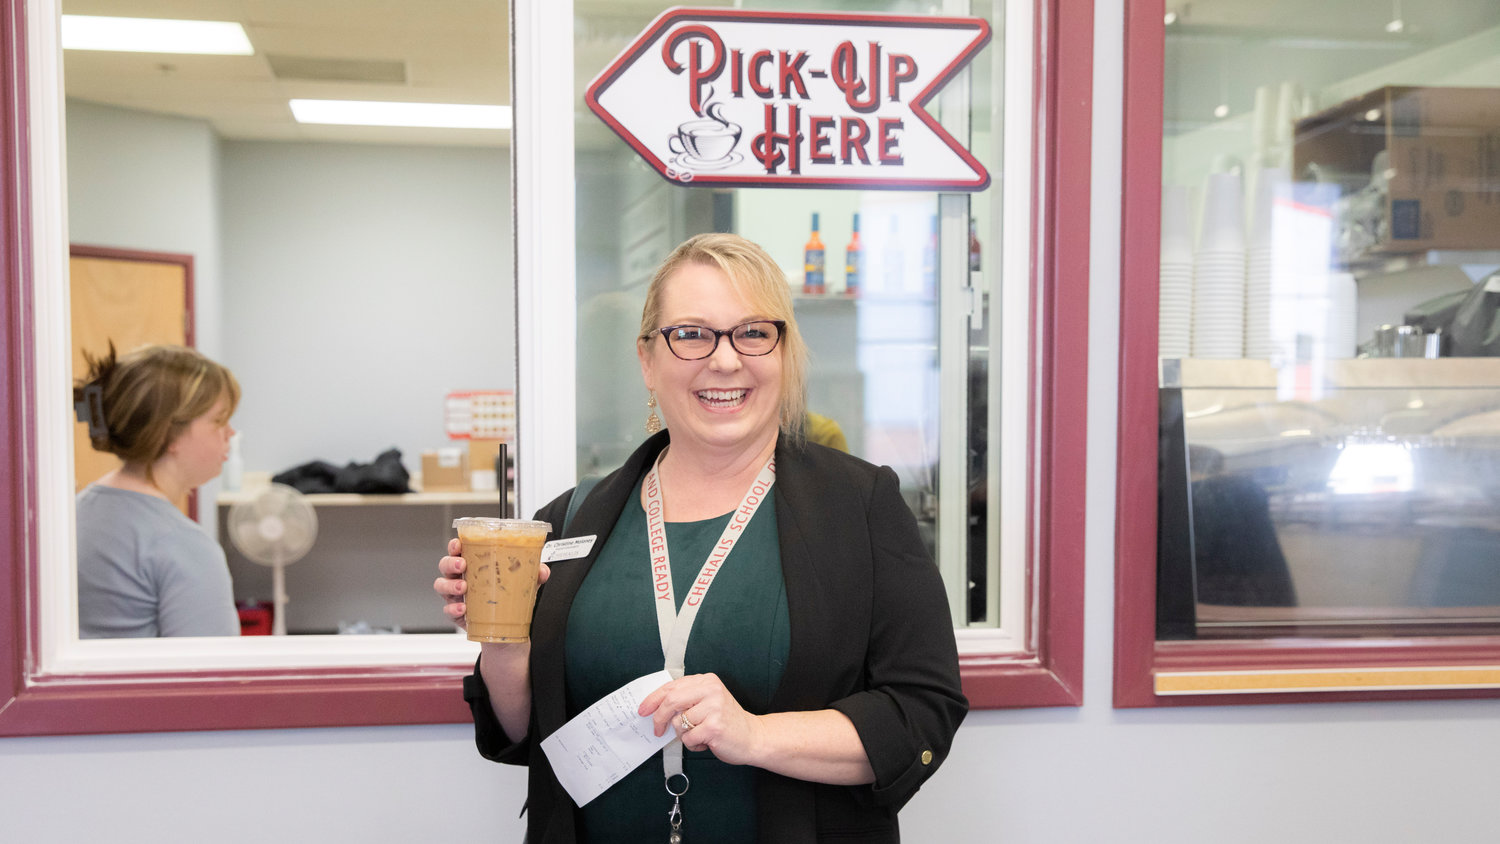 Superintendent Dr. Christine Moloney was served the first drink at "The Crimson & Gray," powered by Lewis County Coffee Co. after the ribbon cutting ceremony in Chehalis.